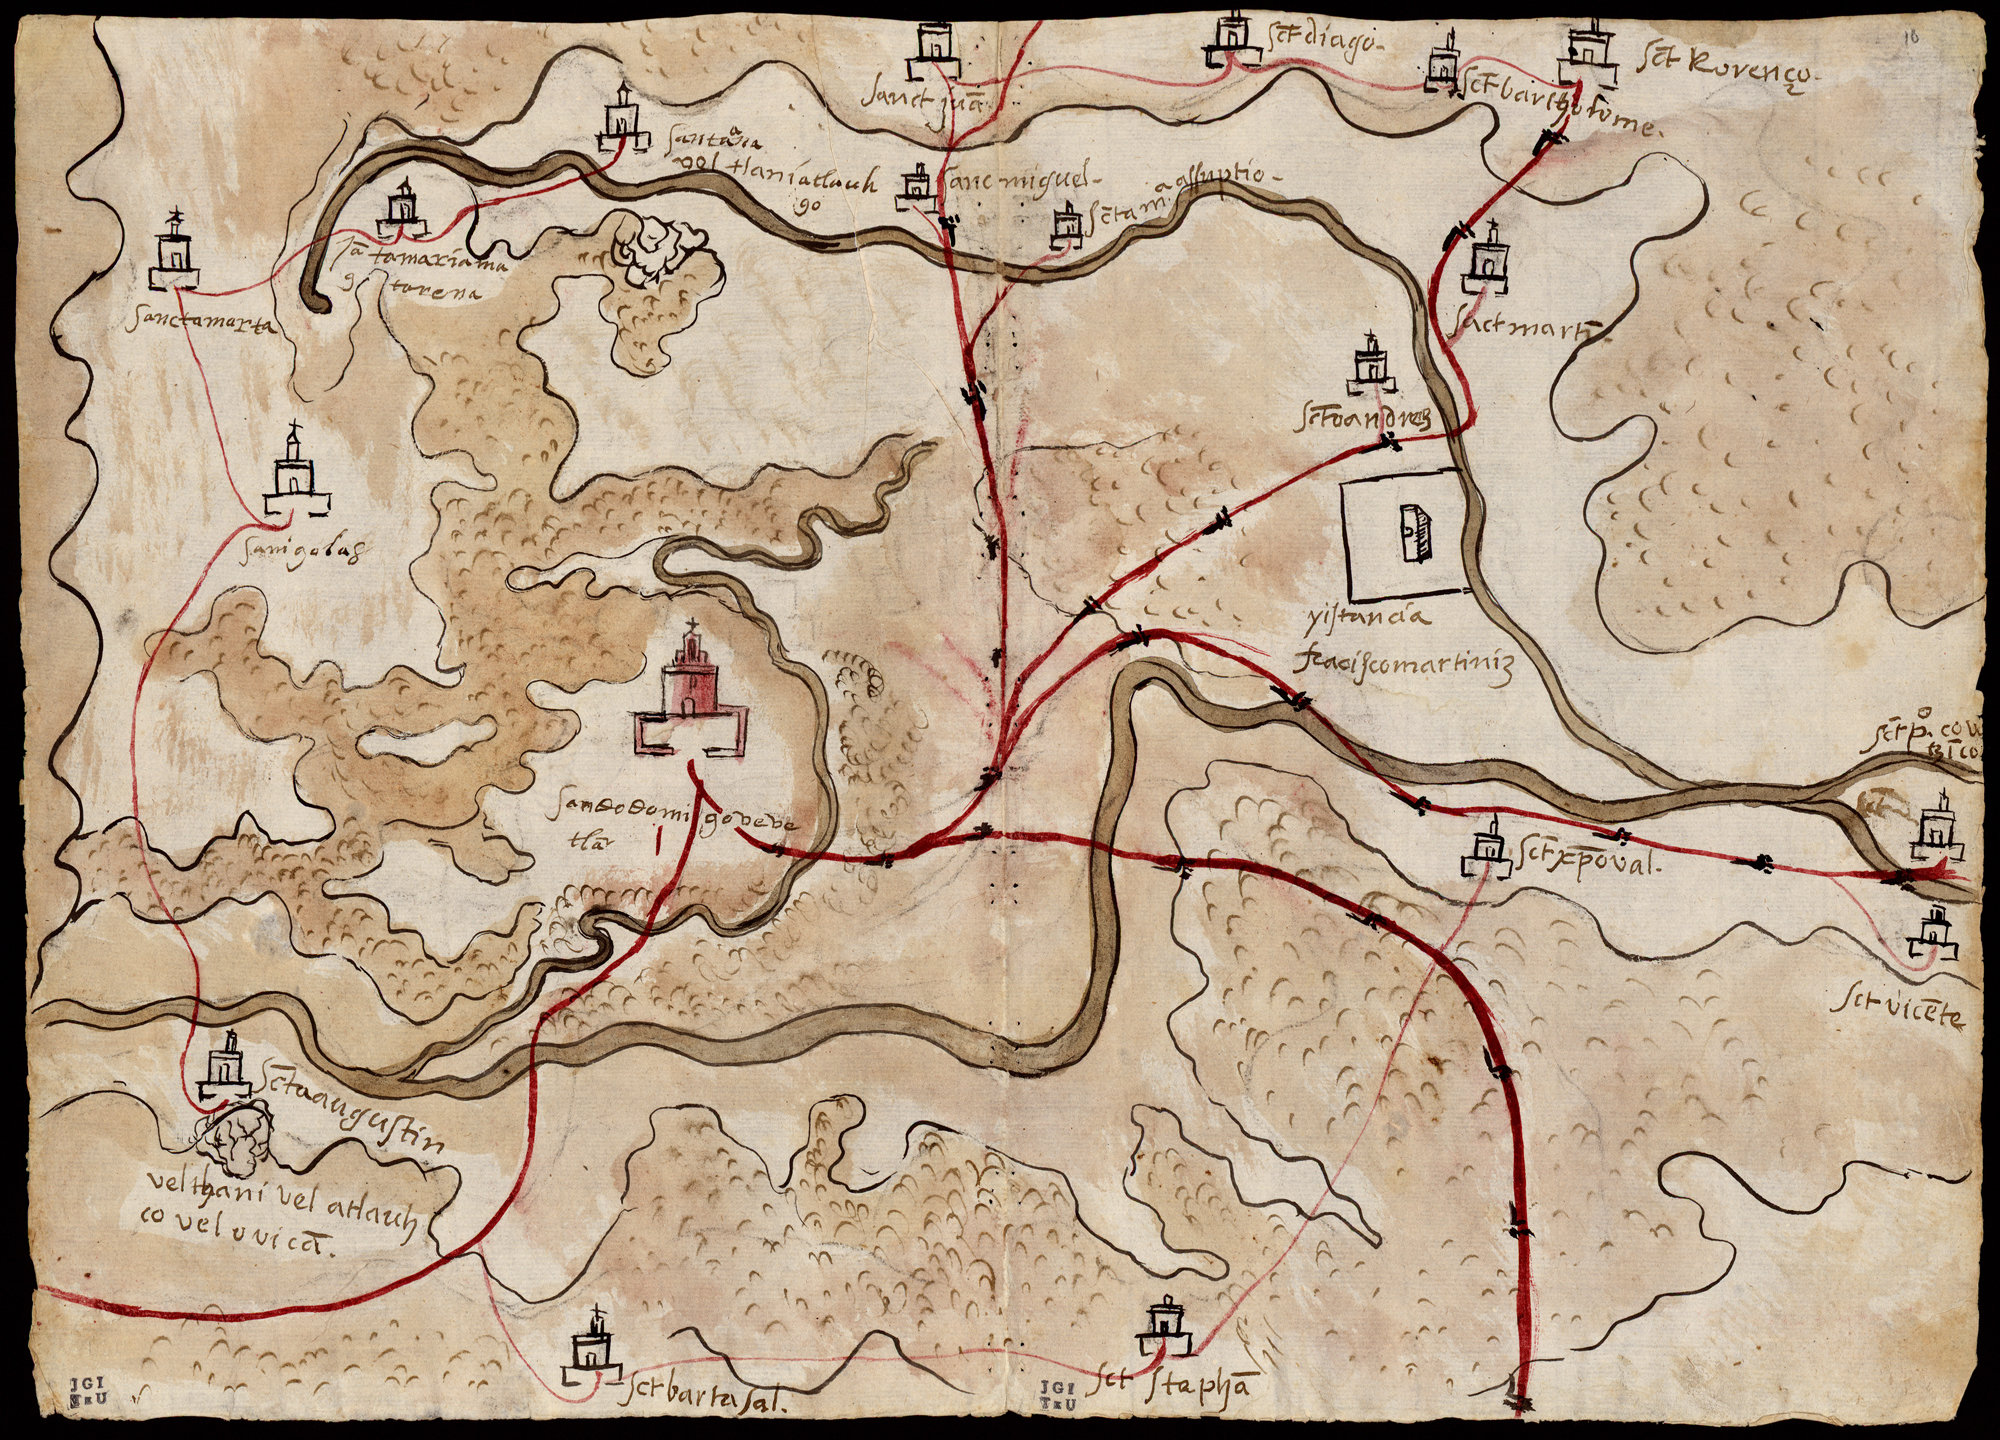 This 1579 watercolor and ink map of Gueguetlan has notations the provide guidance about a town being "in a very low area" or being a "dangerous place." The inscriptions are in an indigenous language that Europeans wouldn't understand. Granados asks: "Who were these inscriptions written for if they knew that no one but themselves would make sense of them?" Photo: Blanton Museum of Art